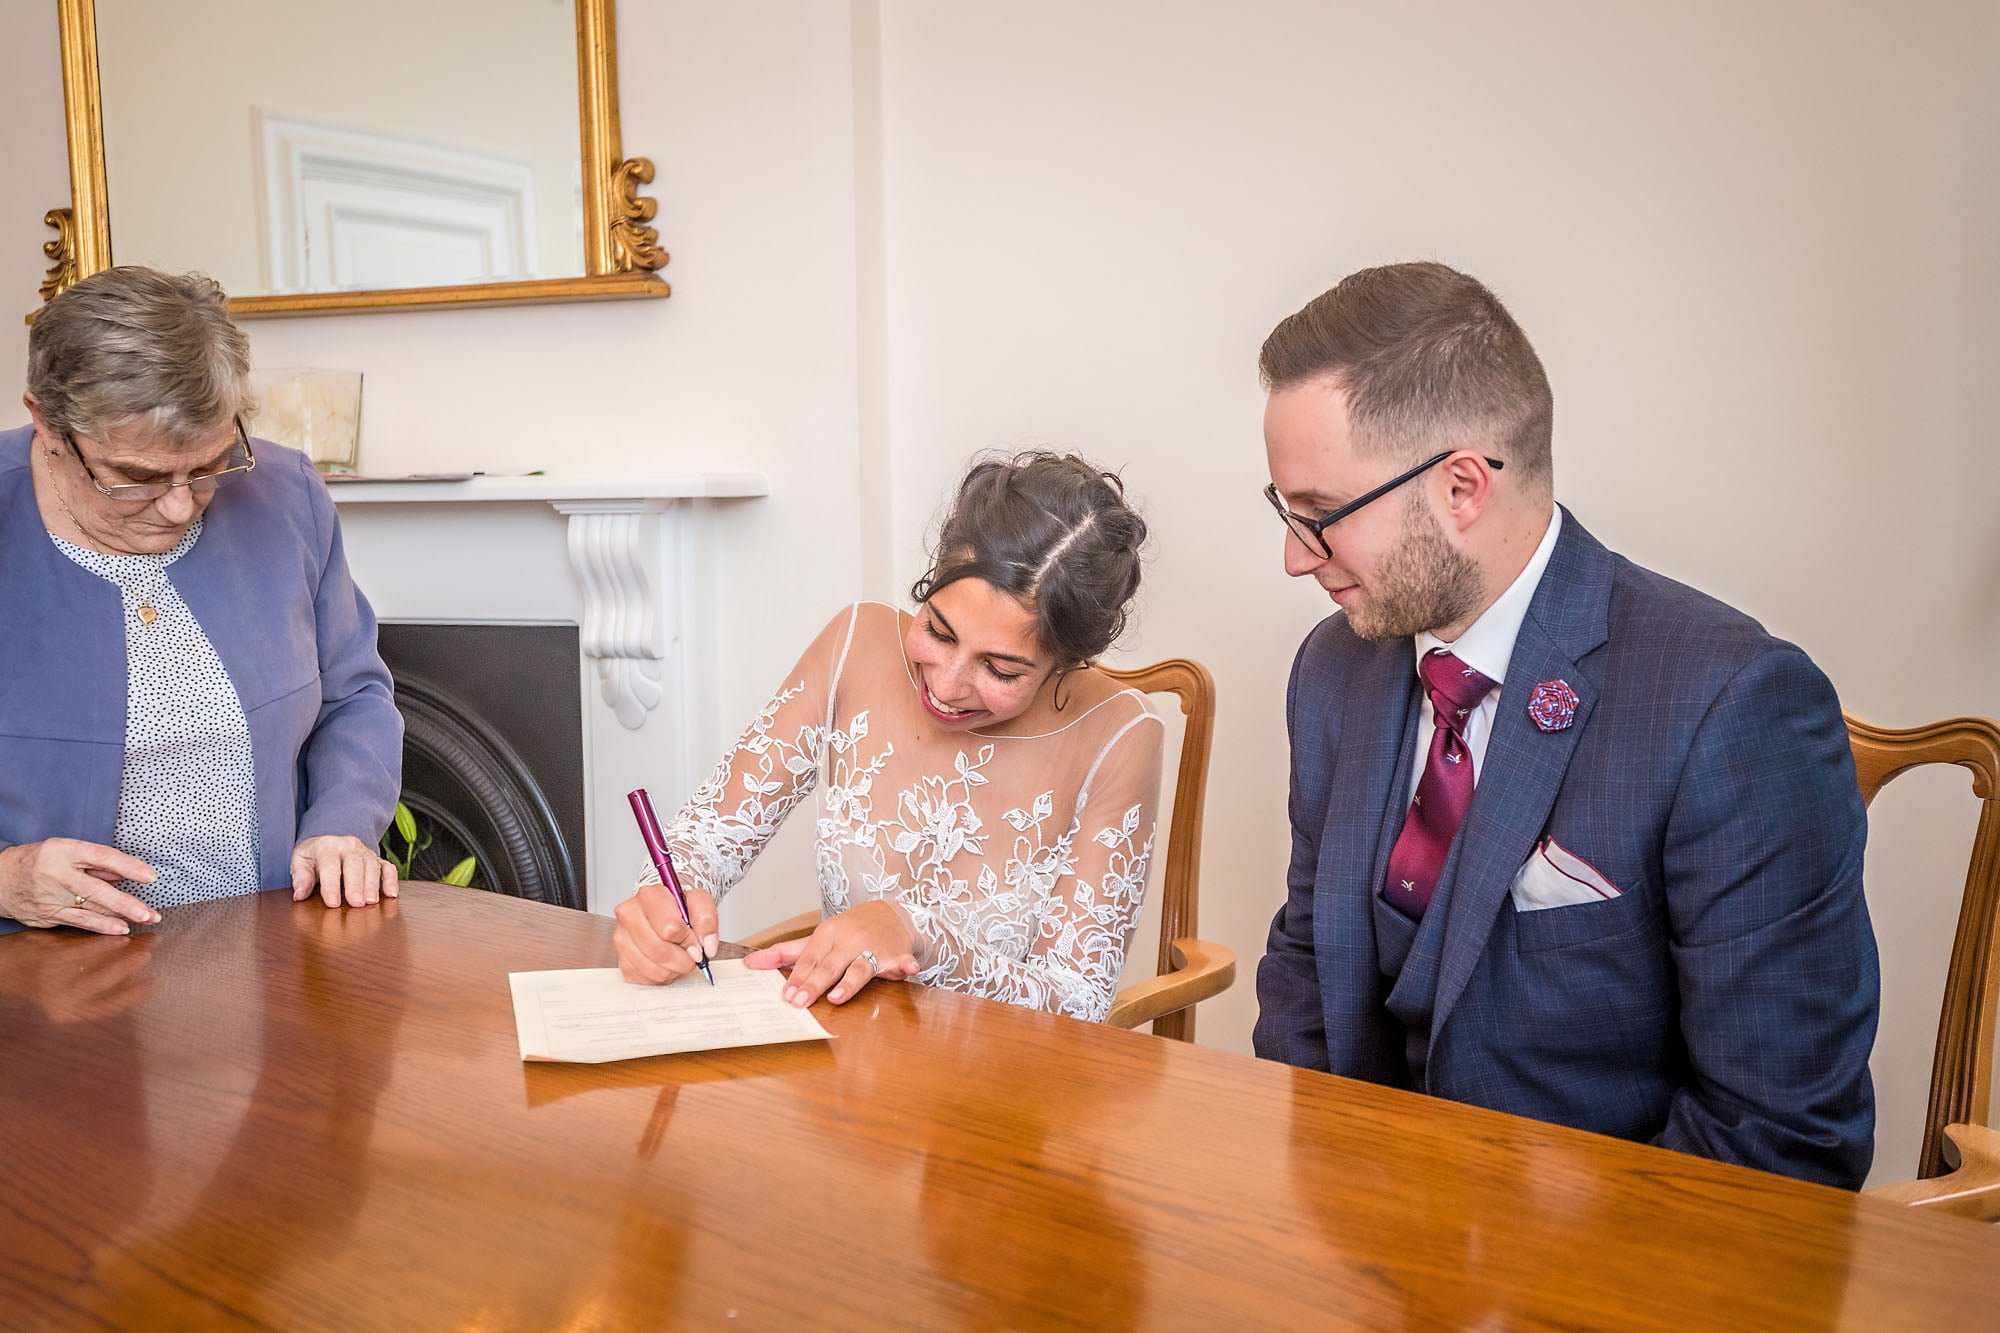 Bride smiling and signing her wedding schedule at Woolwich Town Hall